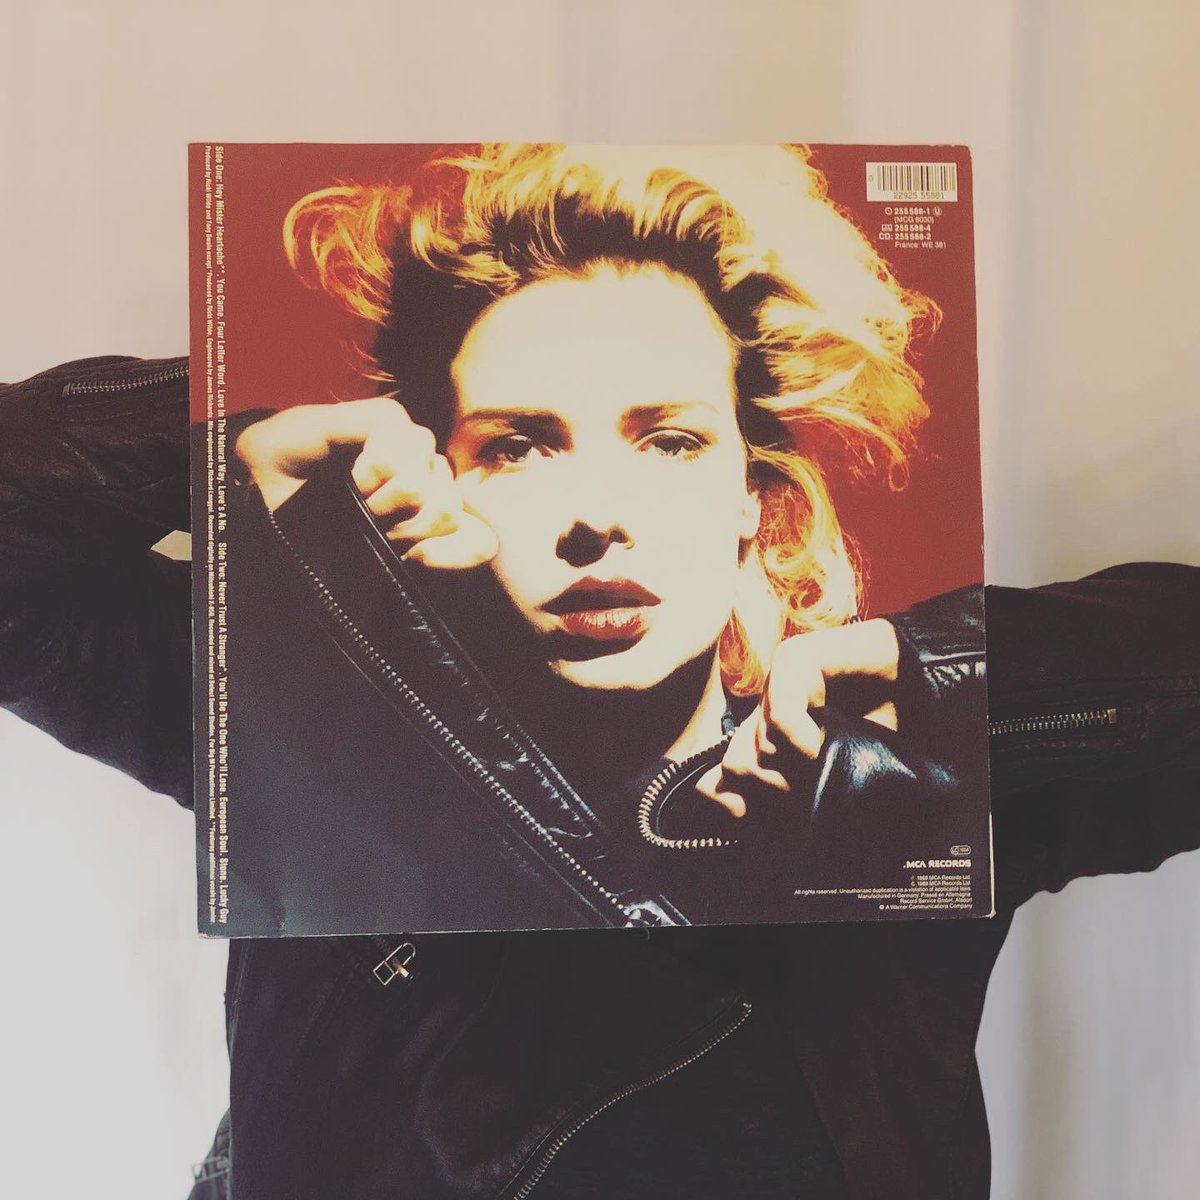 I hadn‘t the ‚close‘ Vinyl ... thanks to the Easter bunny ... now I have it ... #vinylcollection #vinyloftheday #eastermonday #kimwilde #close #kimwildeofficial #kimwildemusic #kimwildefan #kimwilde_forever 

‚You need a bit more to be a pop star than just a good voice.‘